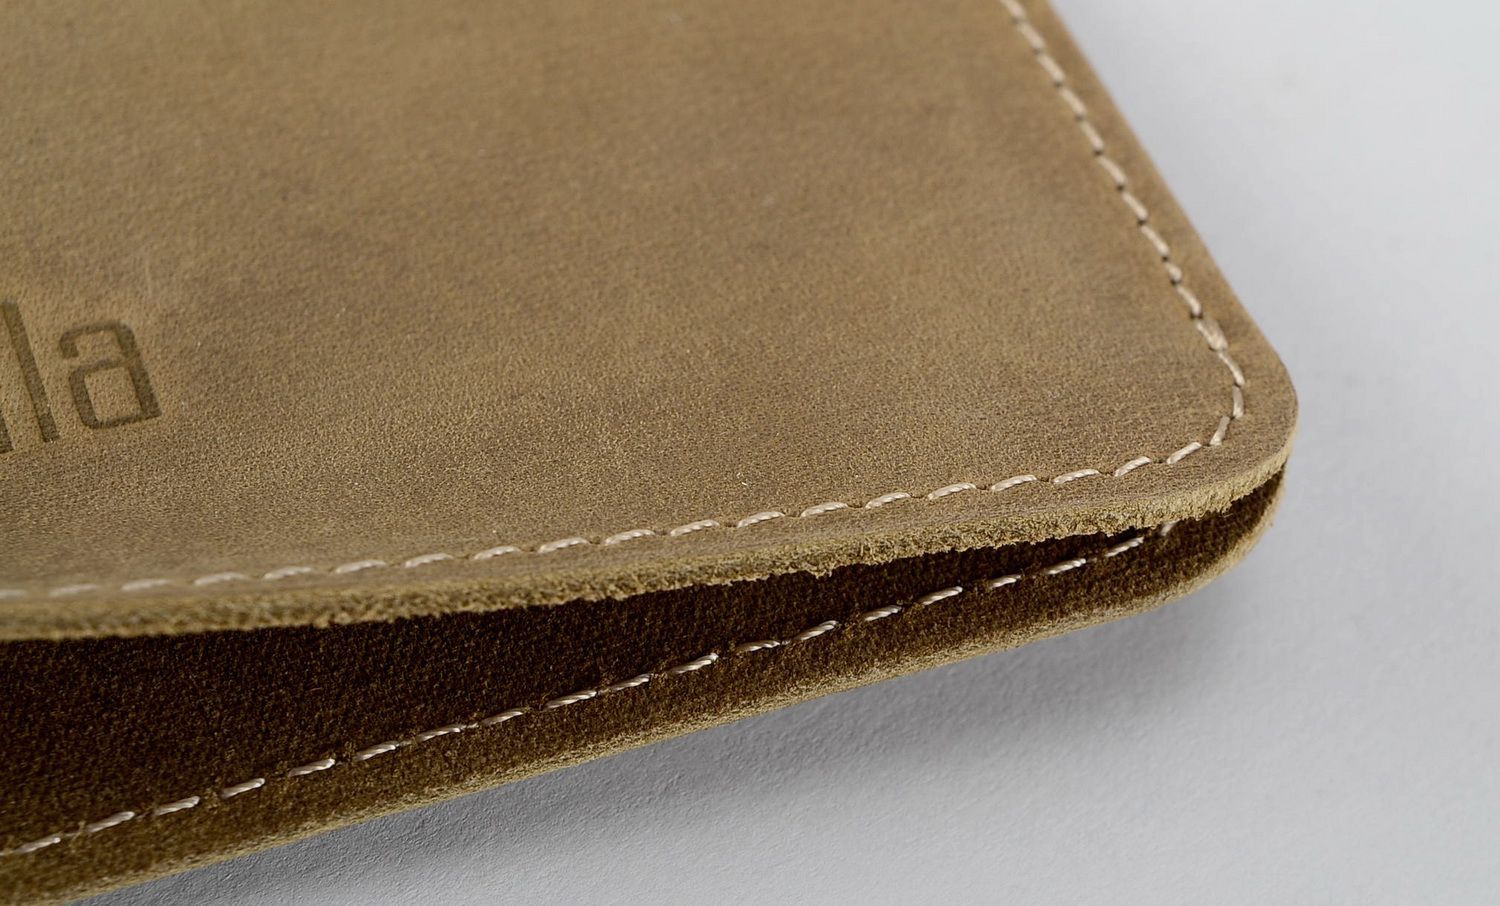 Sleeve for iPhone 4S/5S made of natural leather photo 3